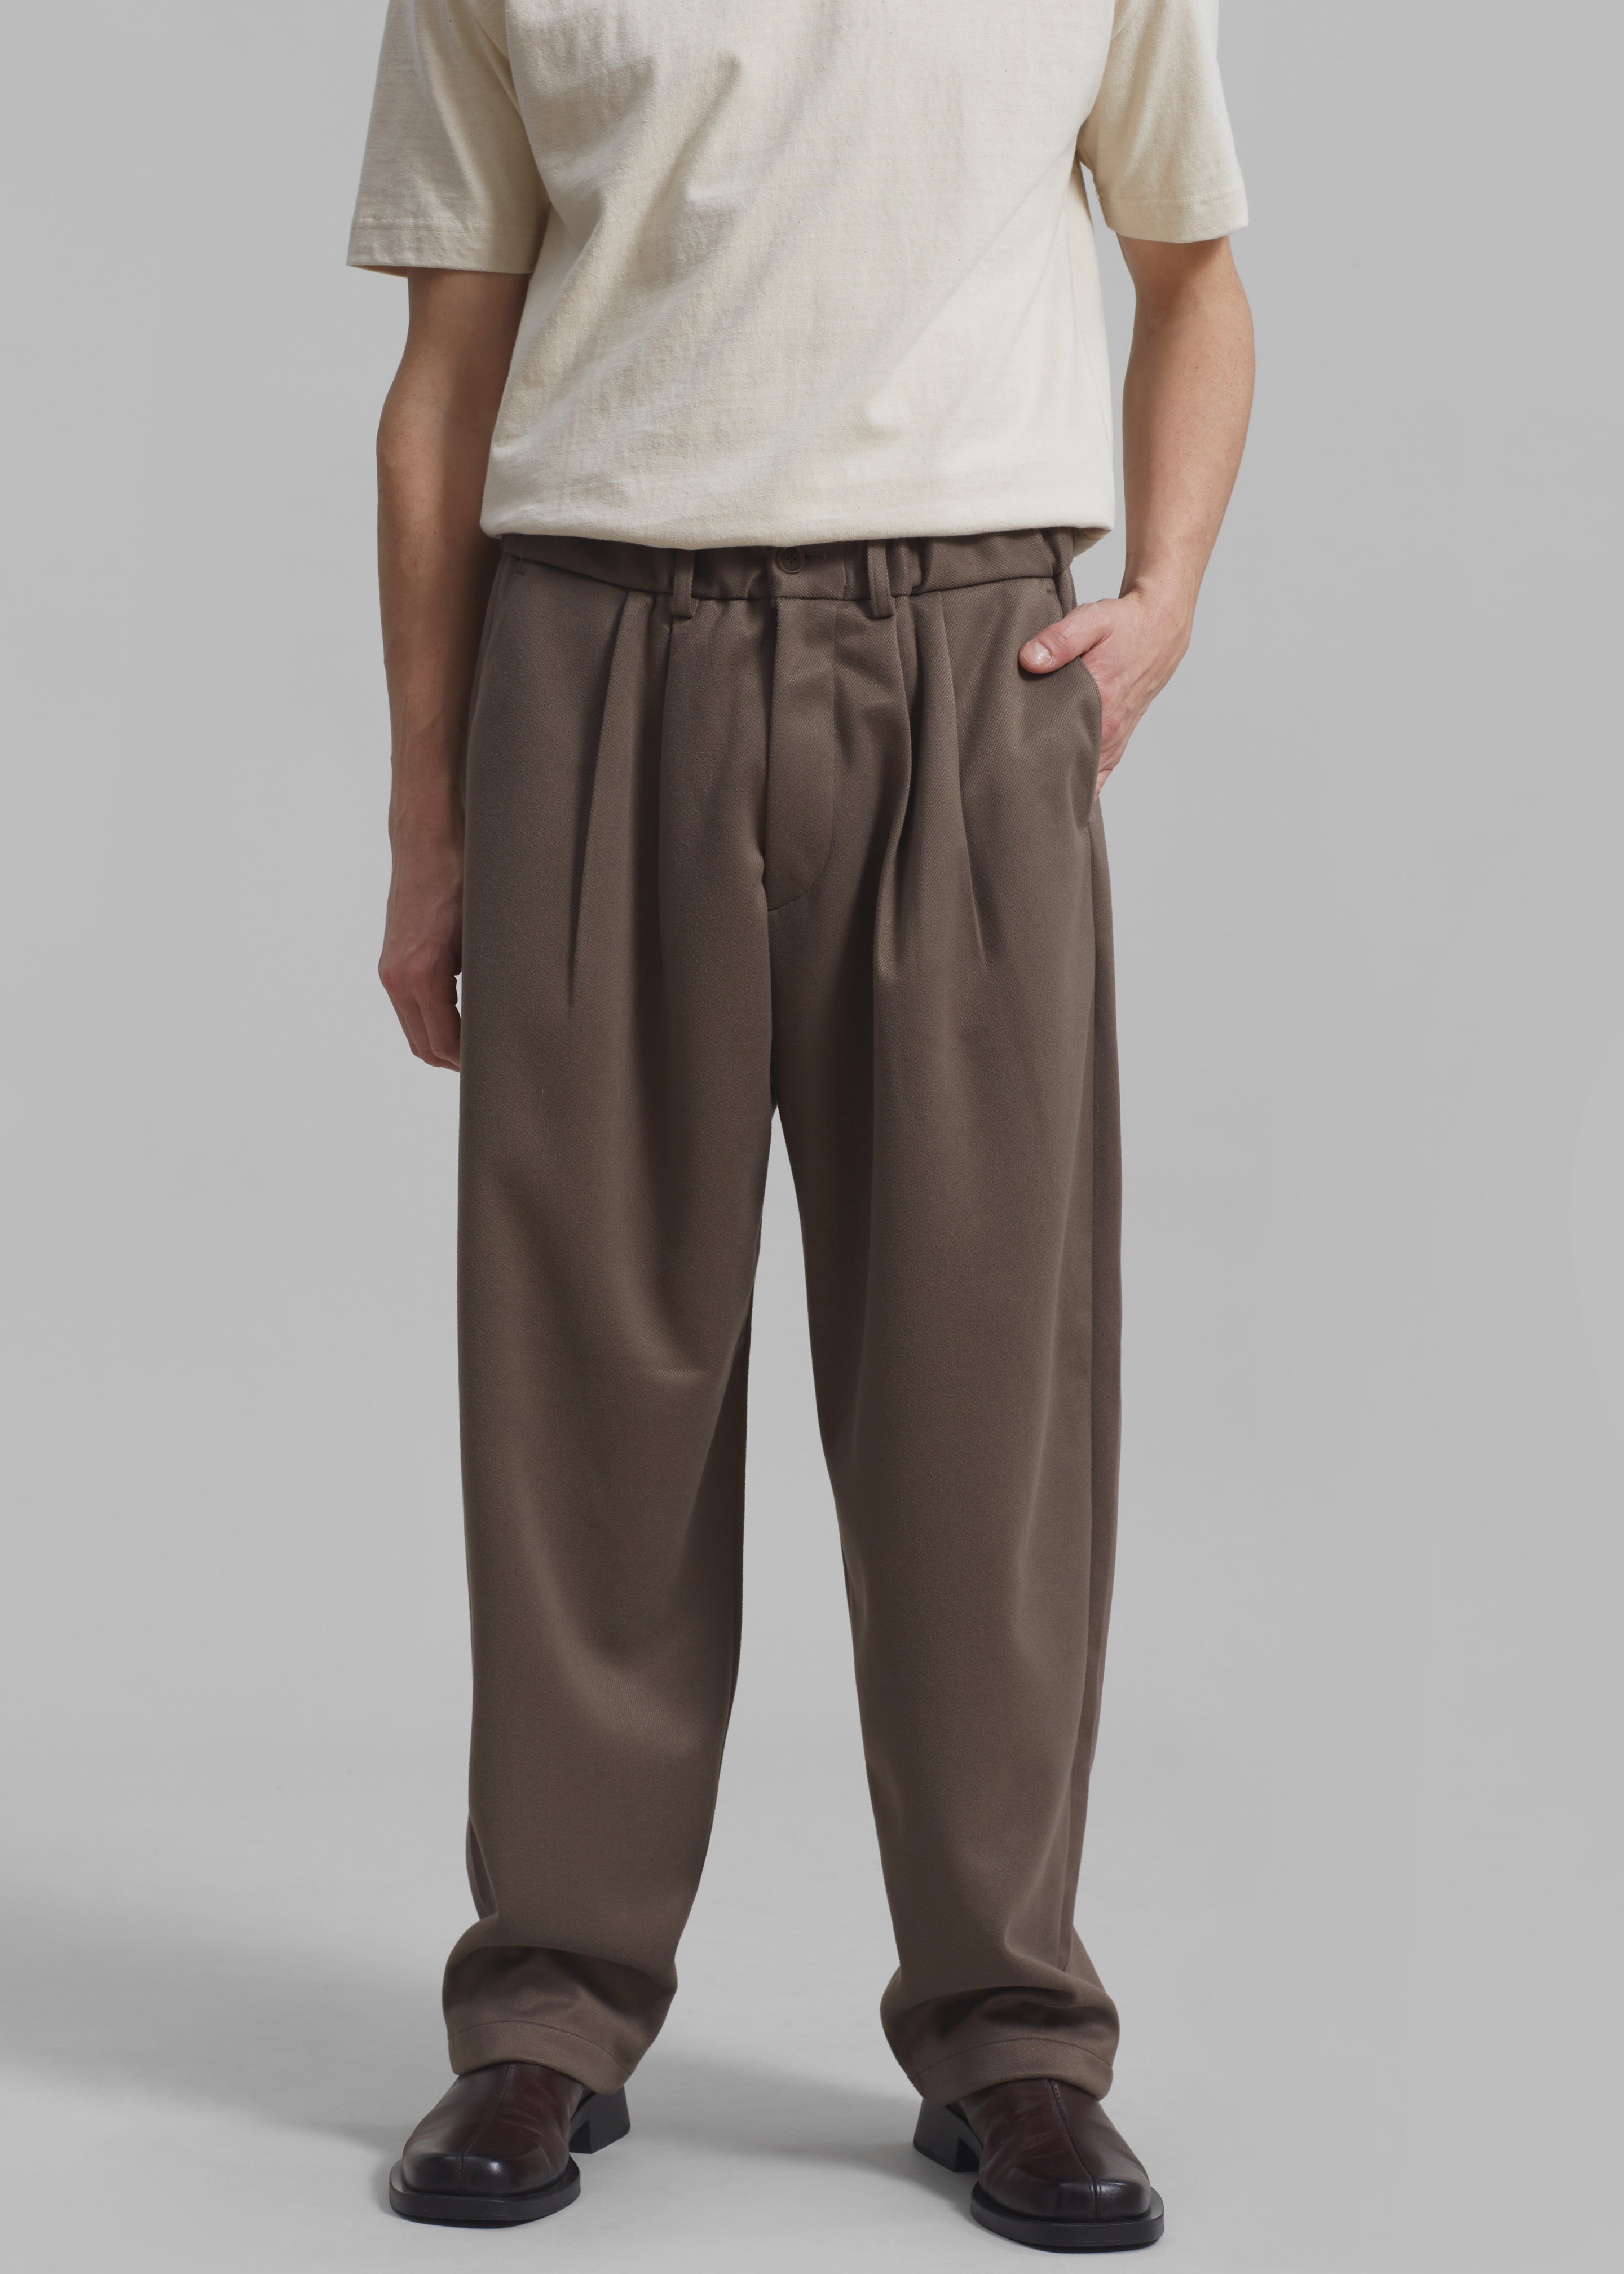 Buy Relaxed Fit Wide Leg Pants with Button Closure and Pockets